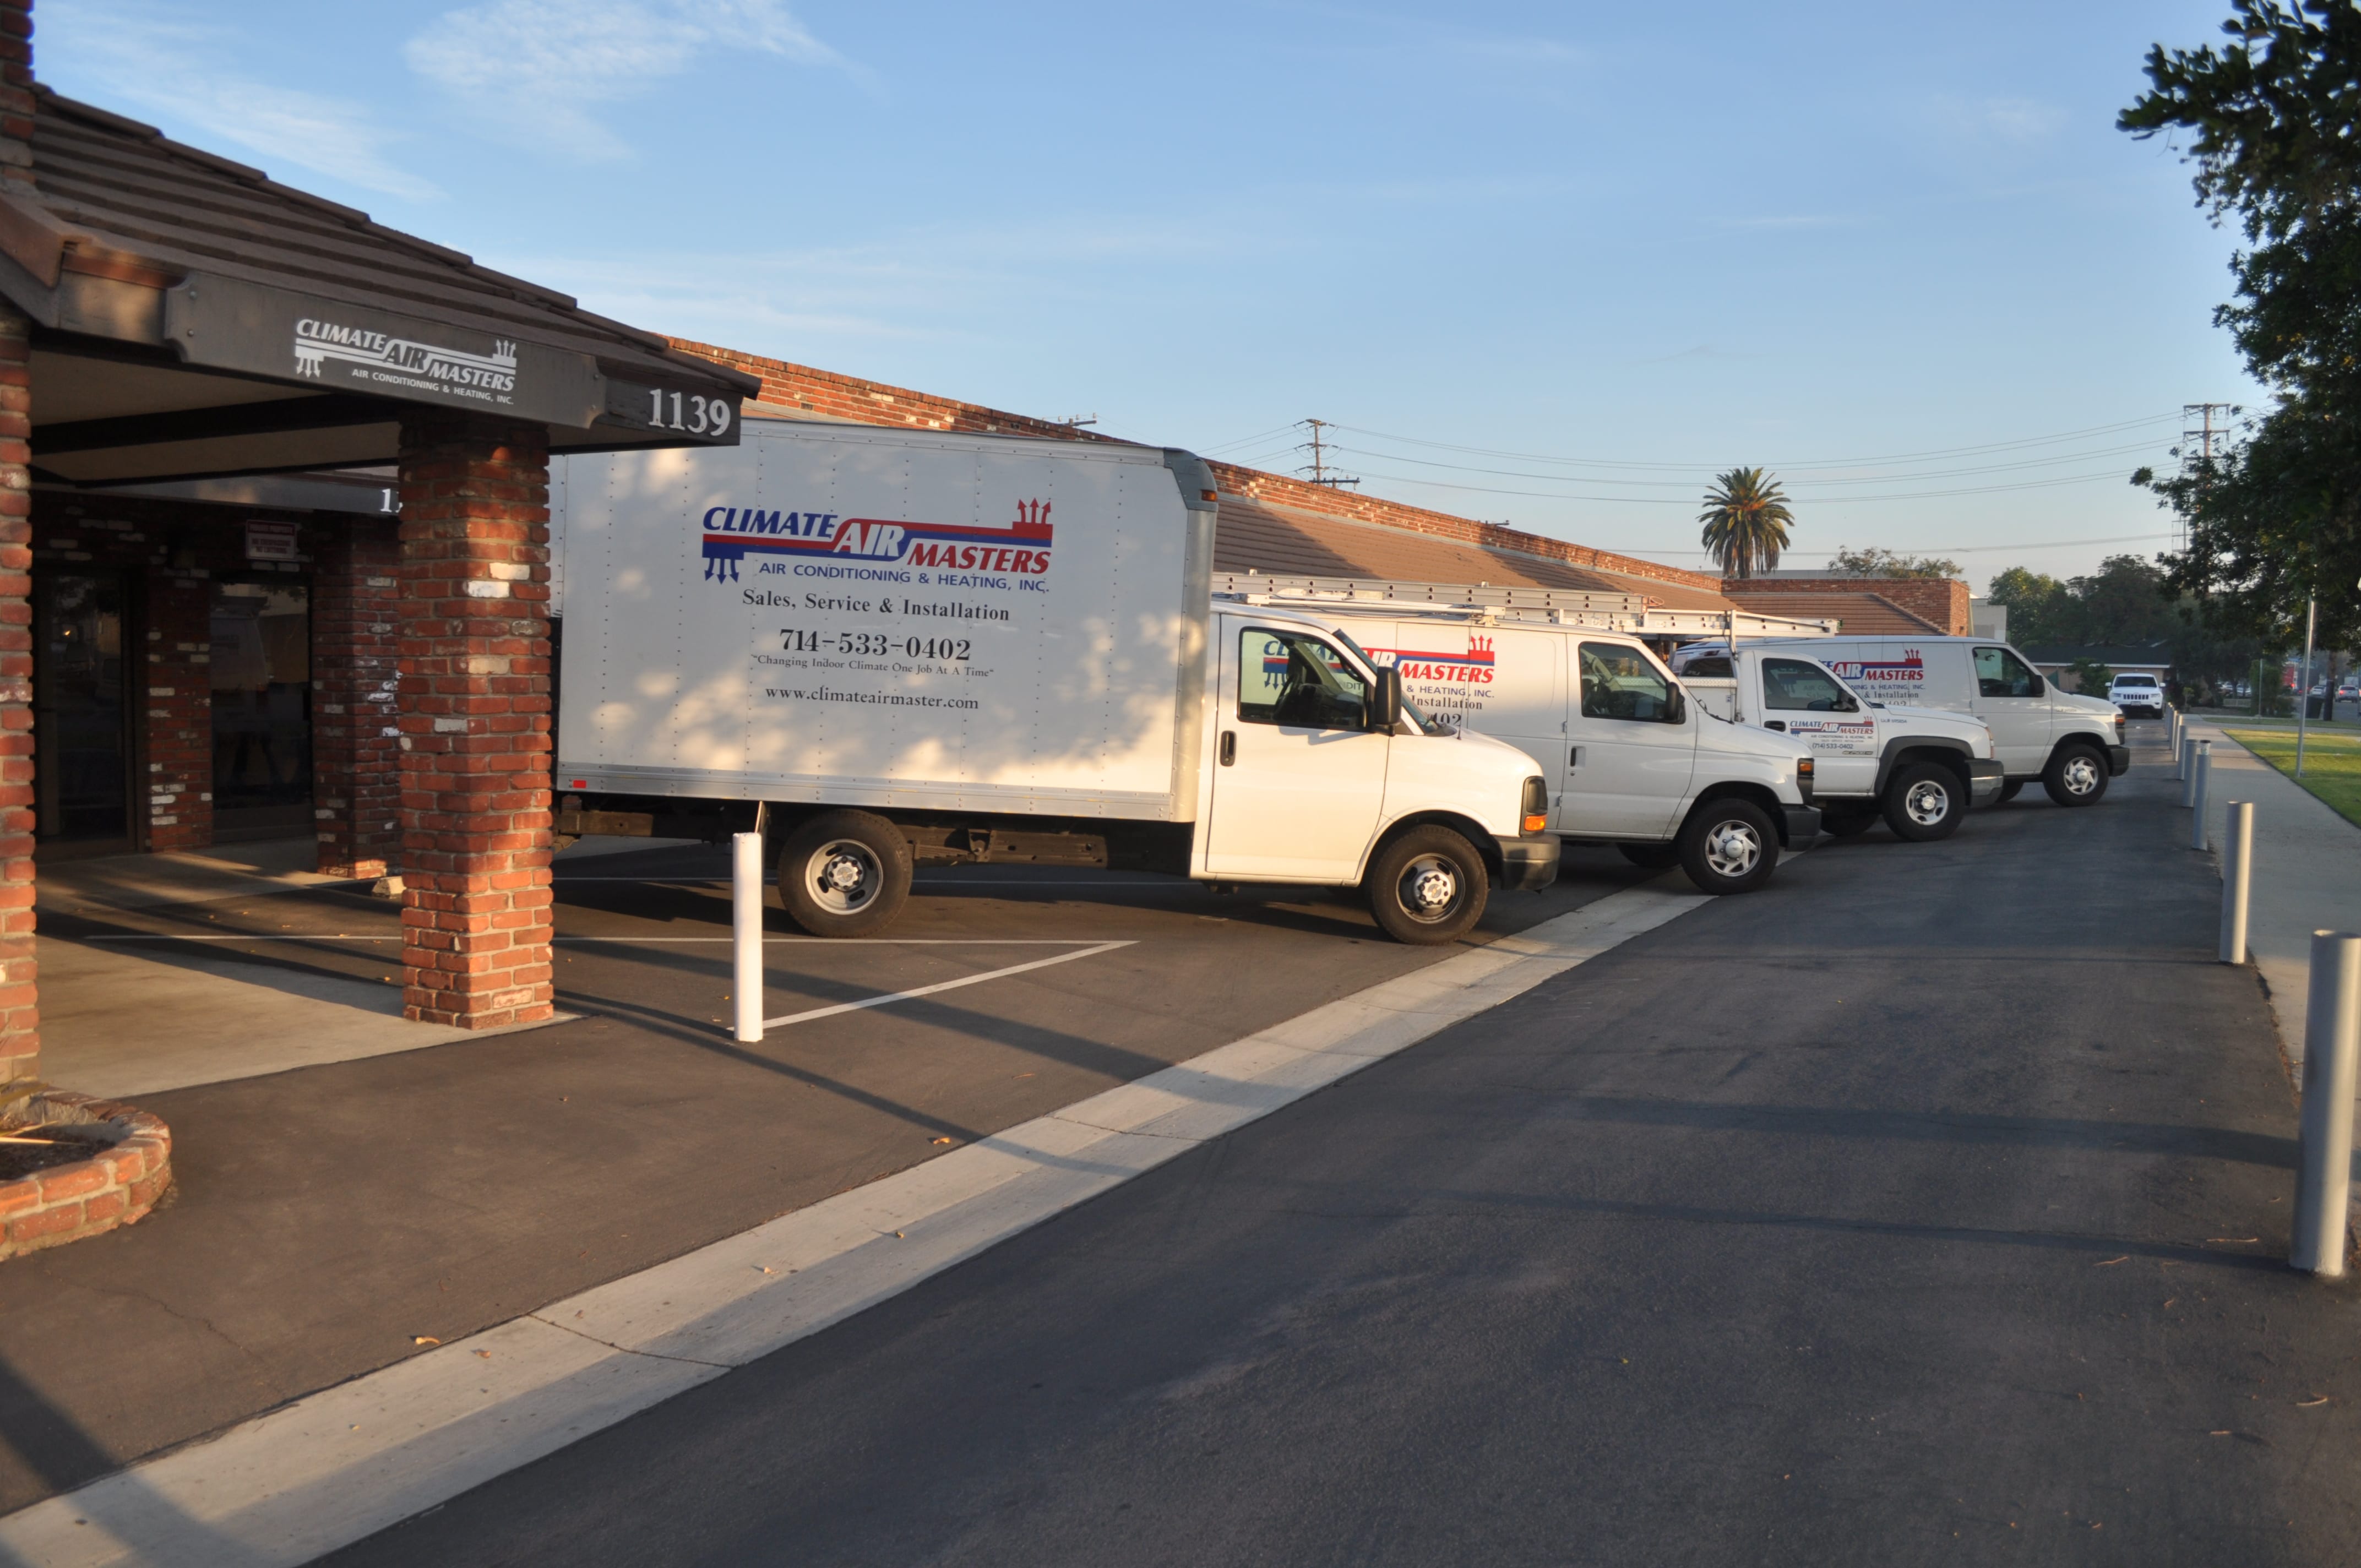 Air Conditioning Services | Climate Air Masters Inc.